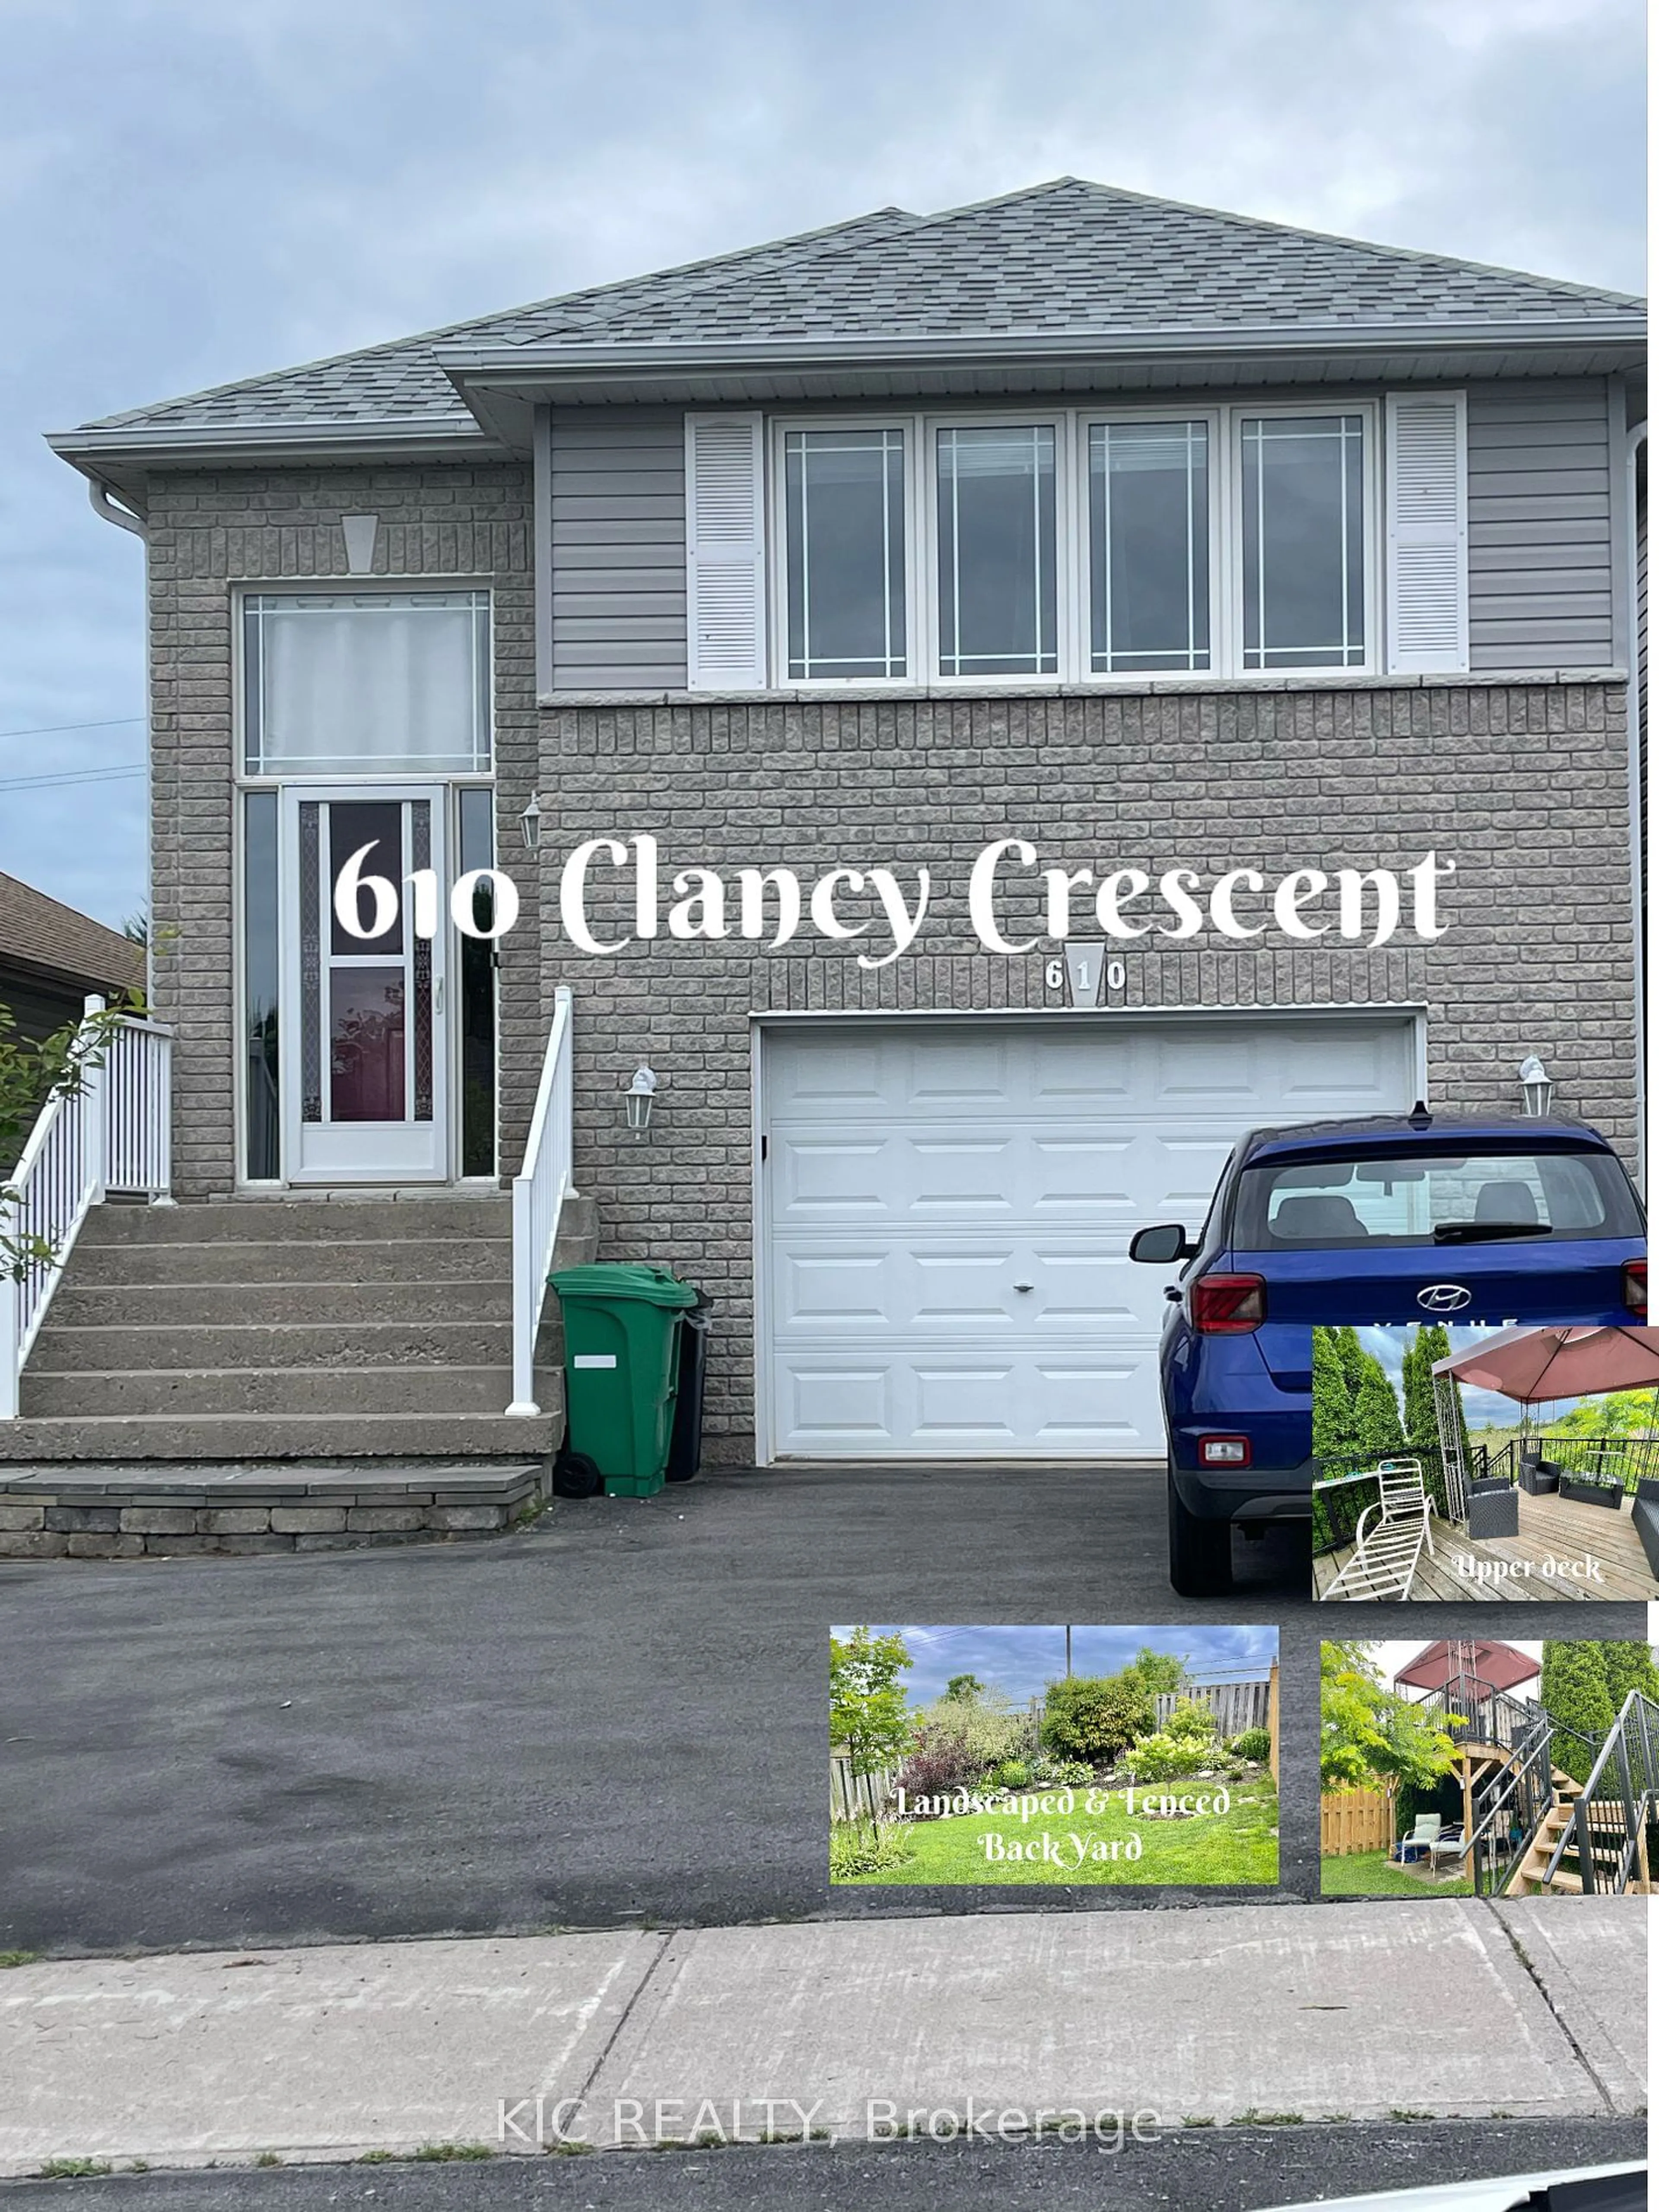 Home with vinyl exterior material for 610 Clancy Cres, Peterborough Ontario K9K 2S2